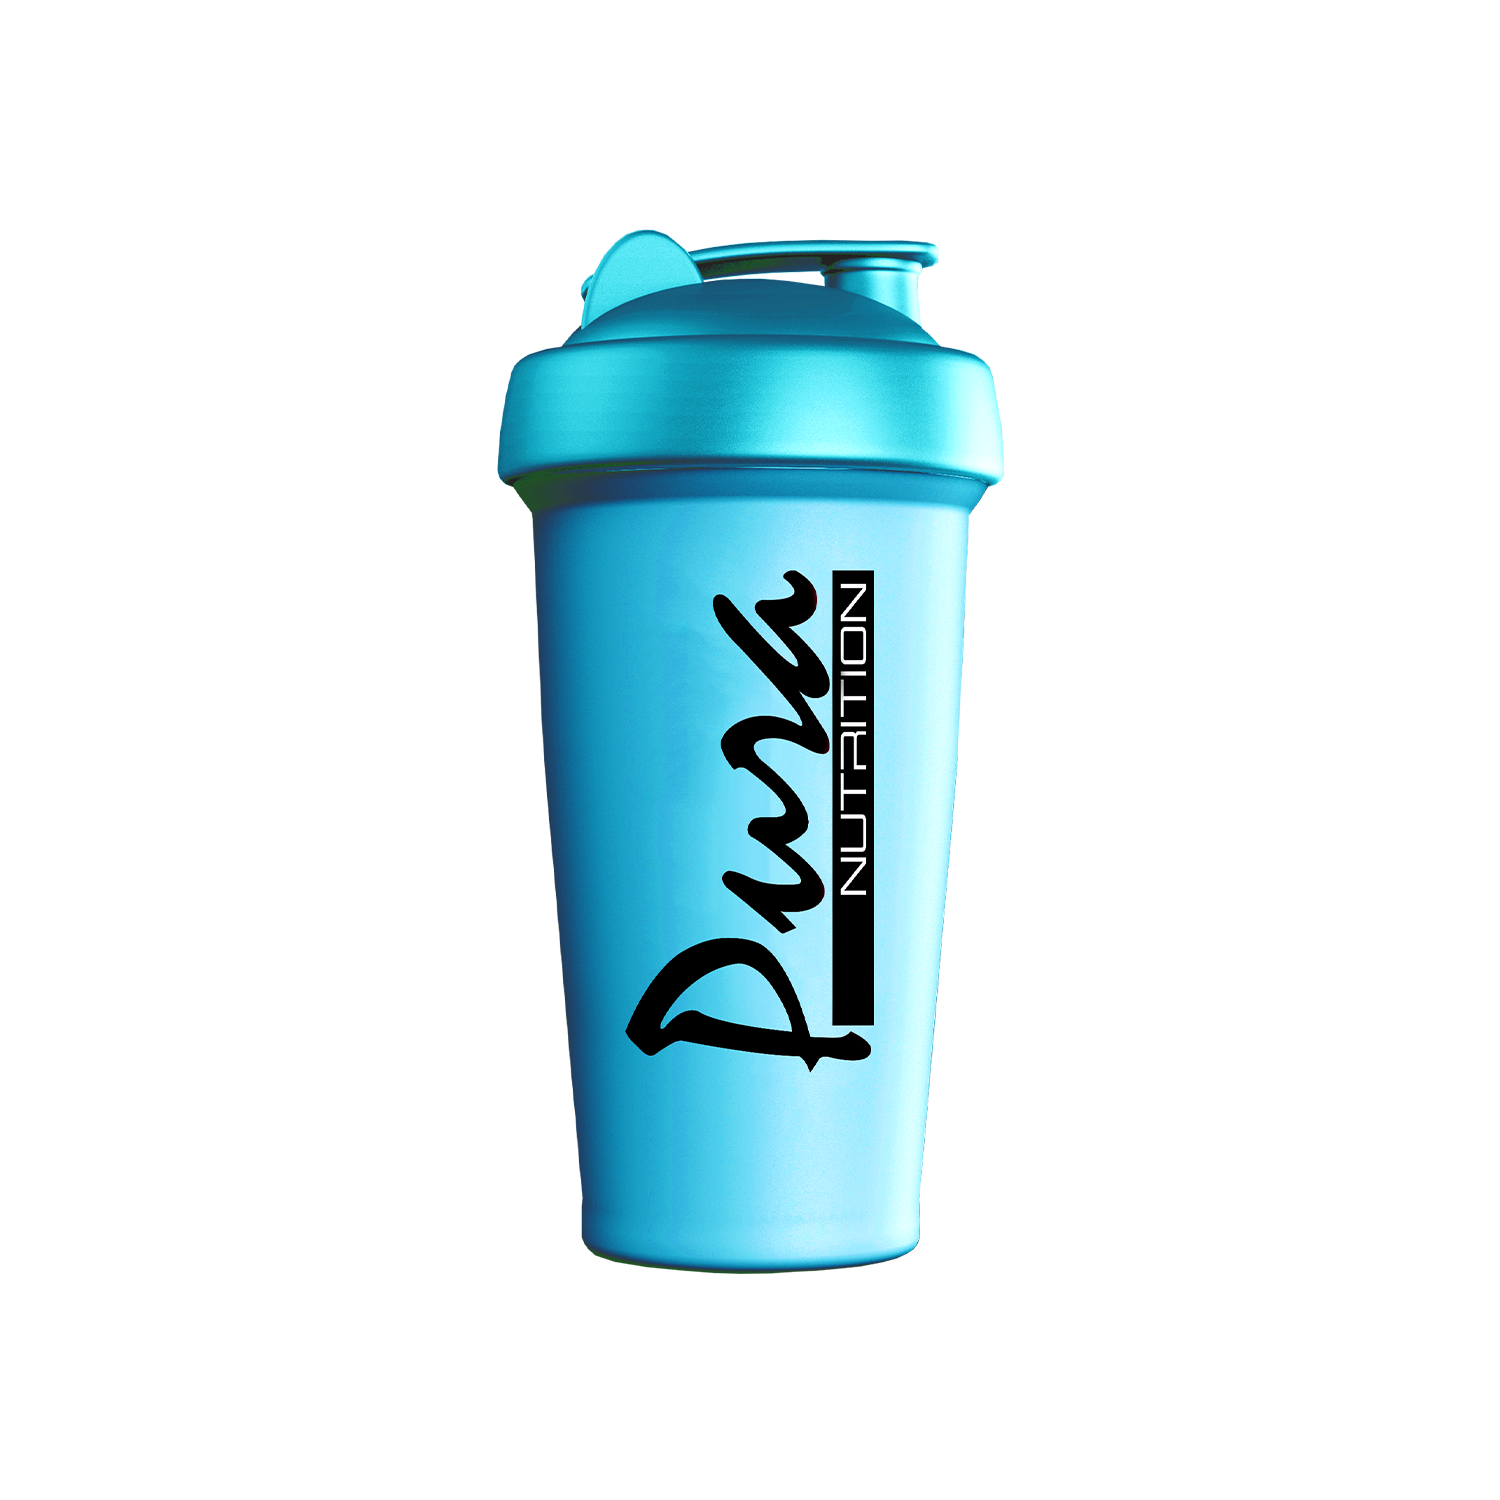 Shaker Cup